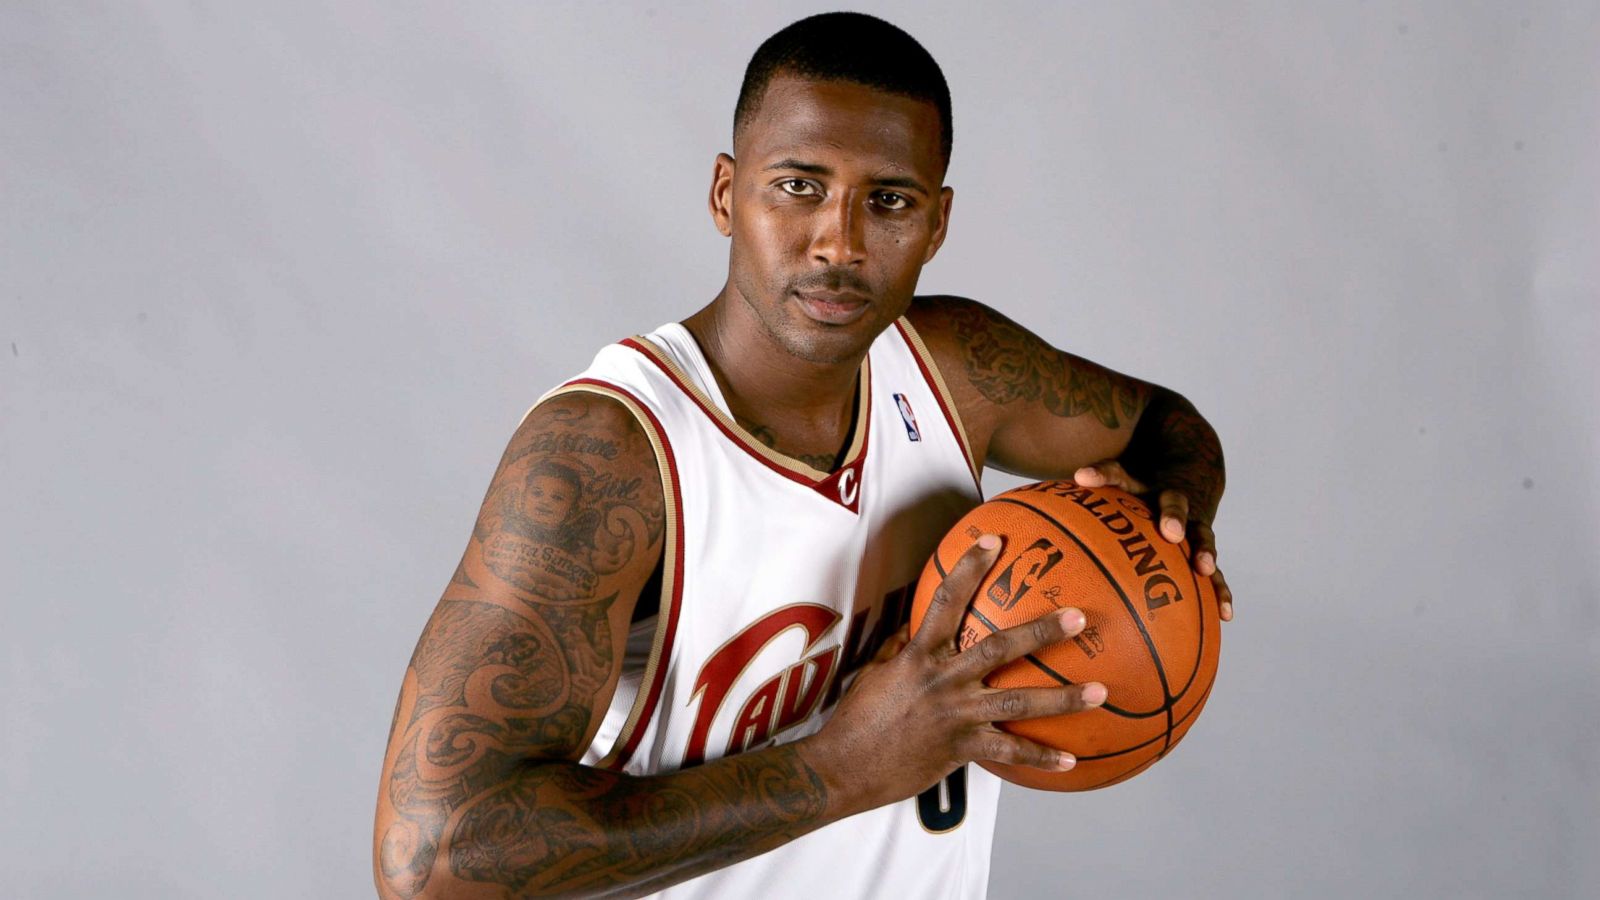 Ex-wife charged in 2010 murder of ex-NBA player Lorenzen Wright